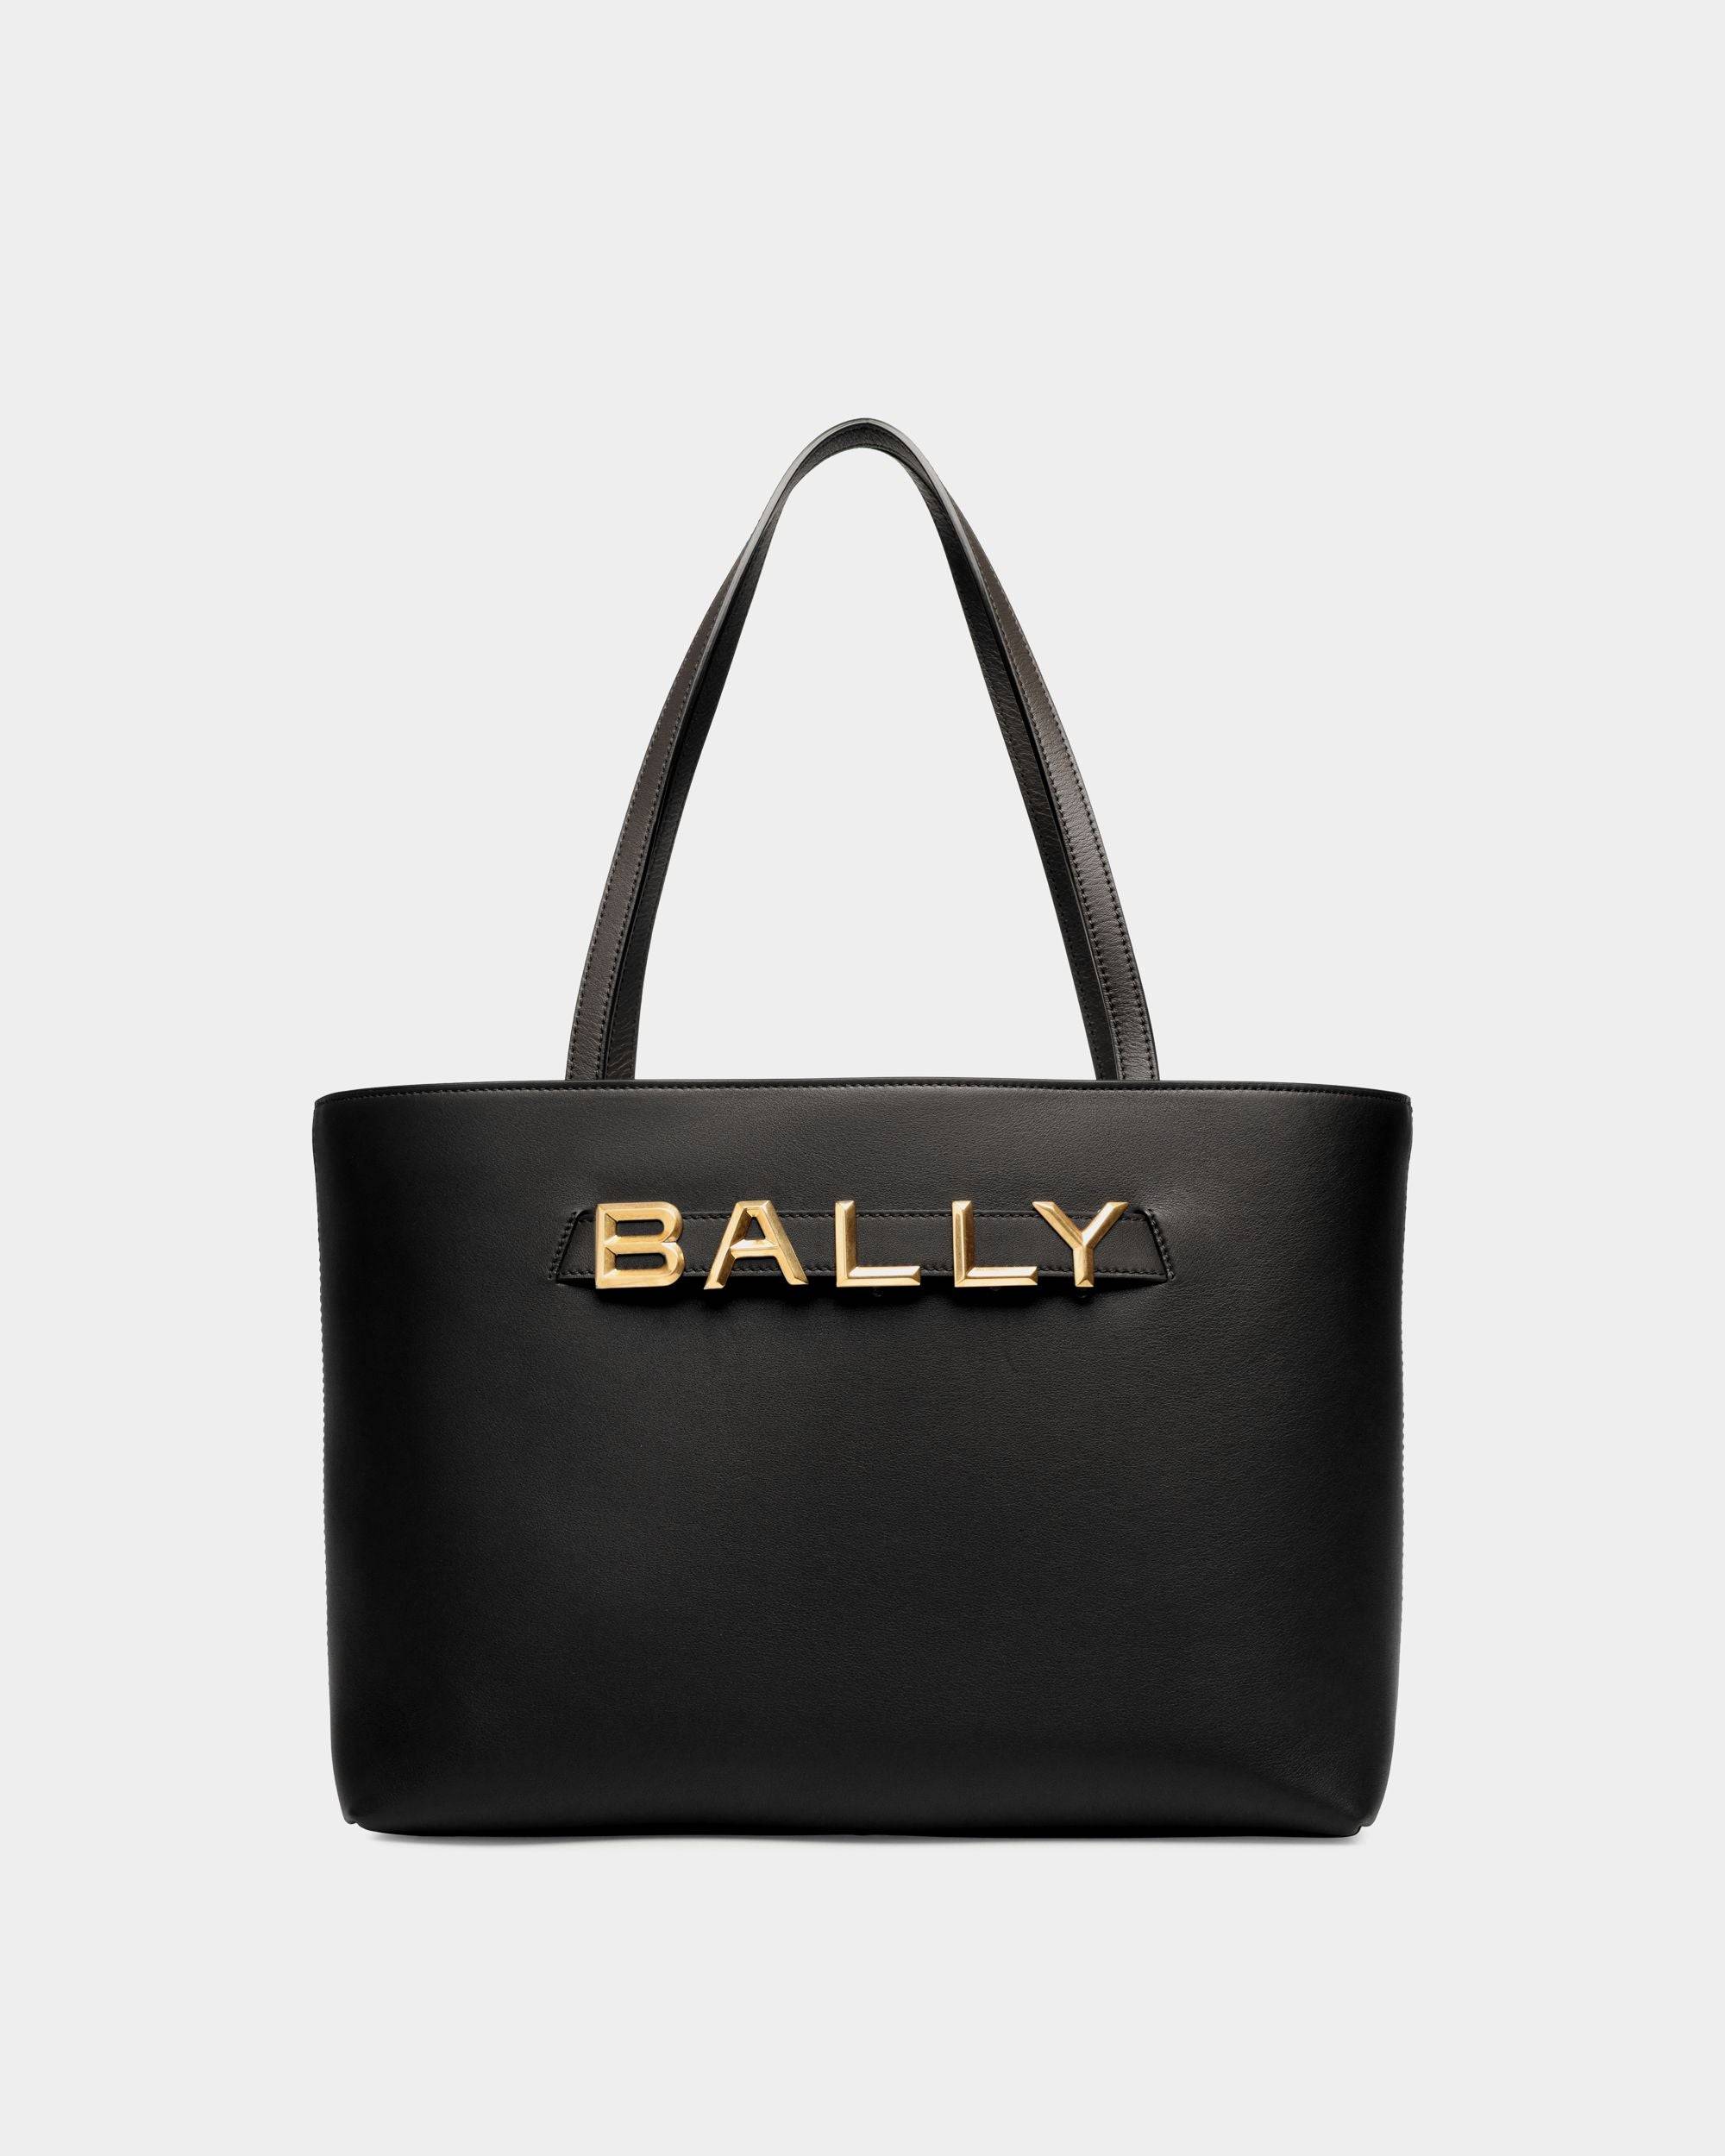 Women's Bally Spell Tote Bag in Black Leather | Bally | Still Life Front